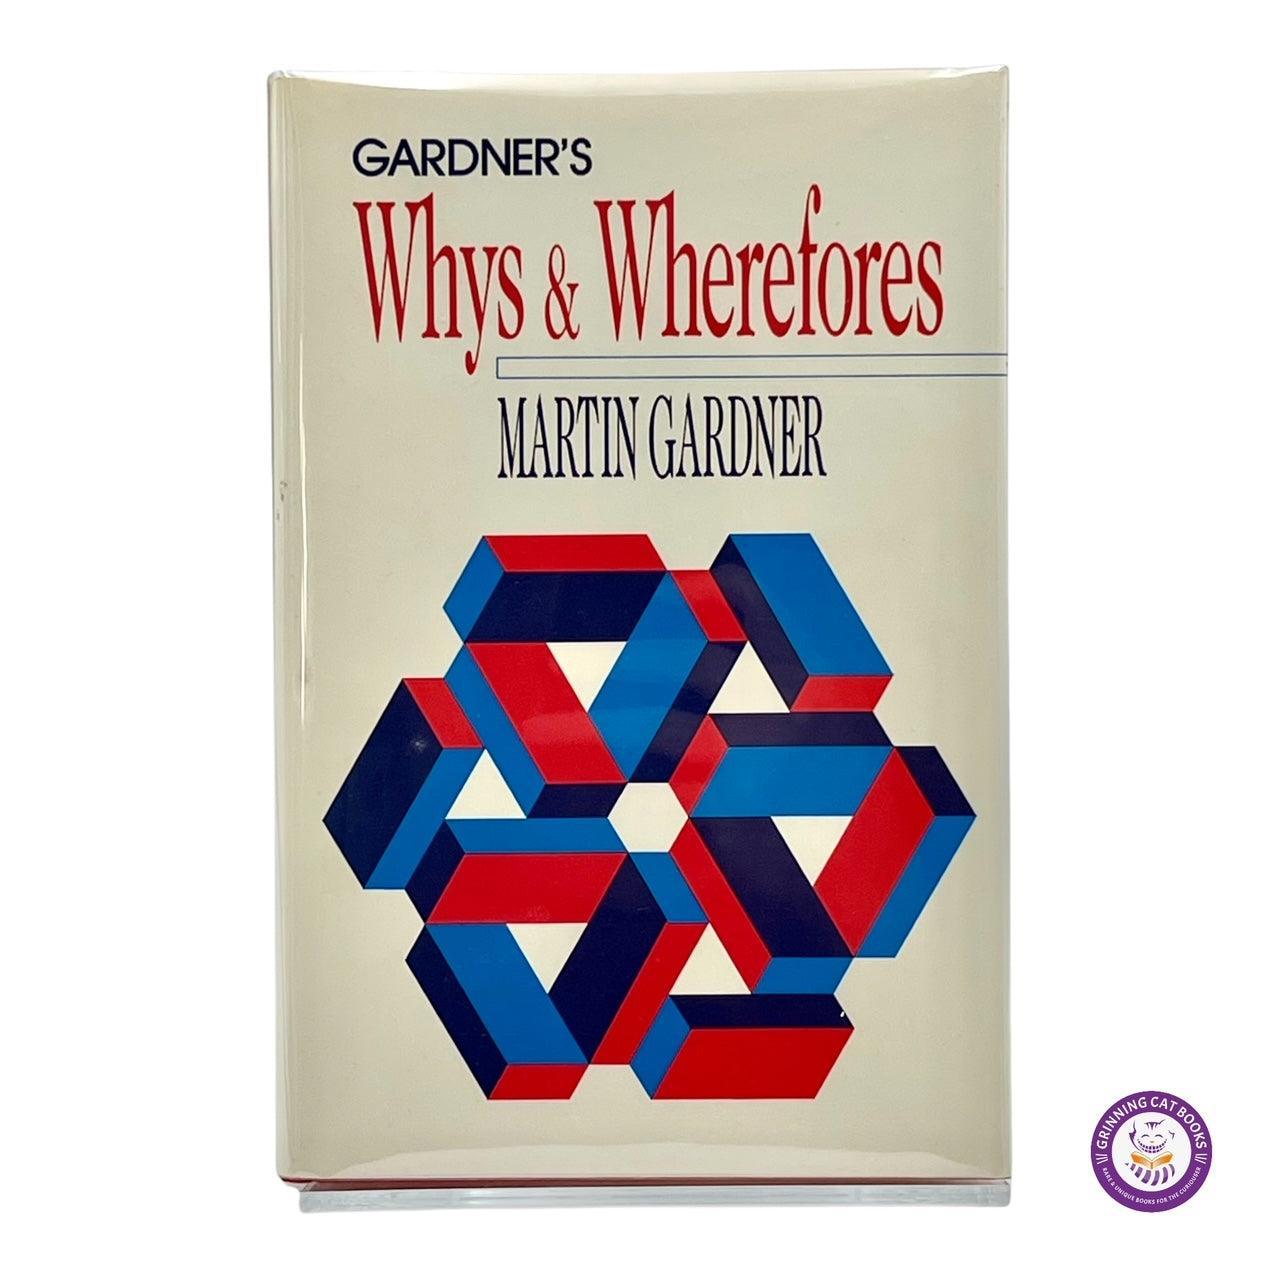 Gardner's Whys & Wherefores (signed) - Grinning Cat Books - SCIENCE - MATHEMATICAL GAMES, MATHEMATICS, SIGNED